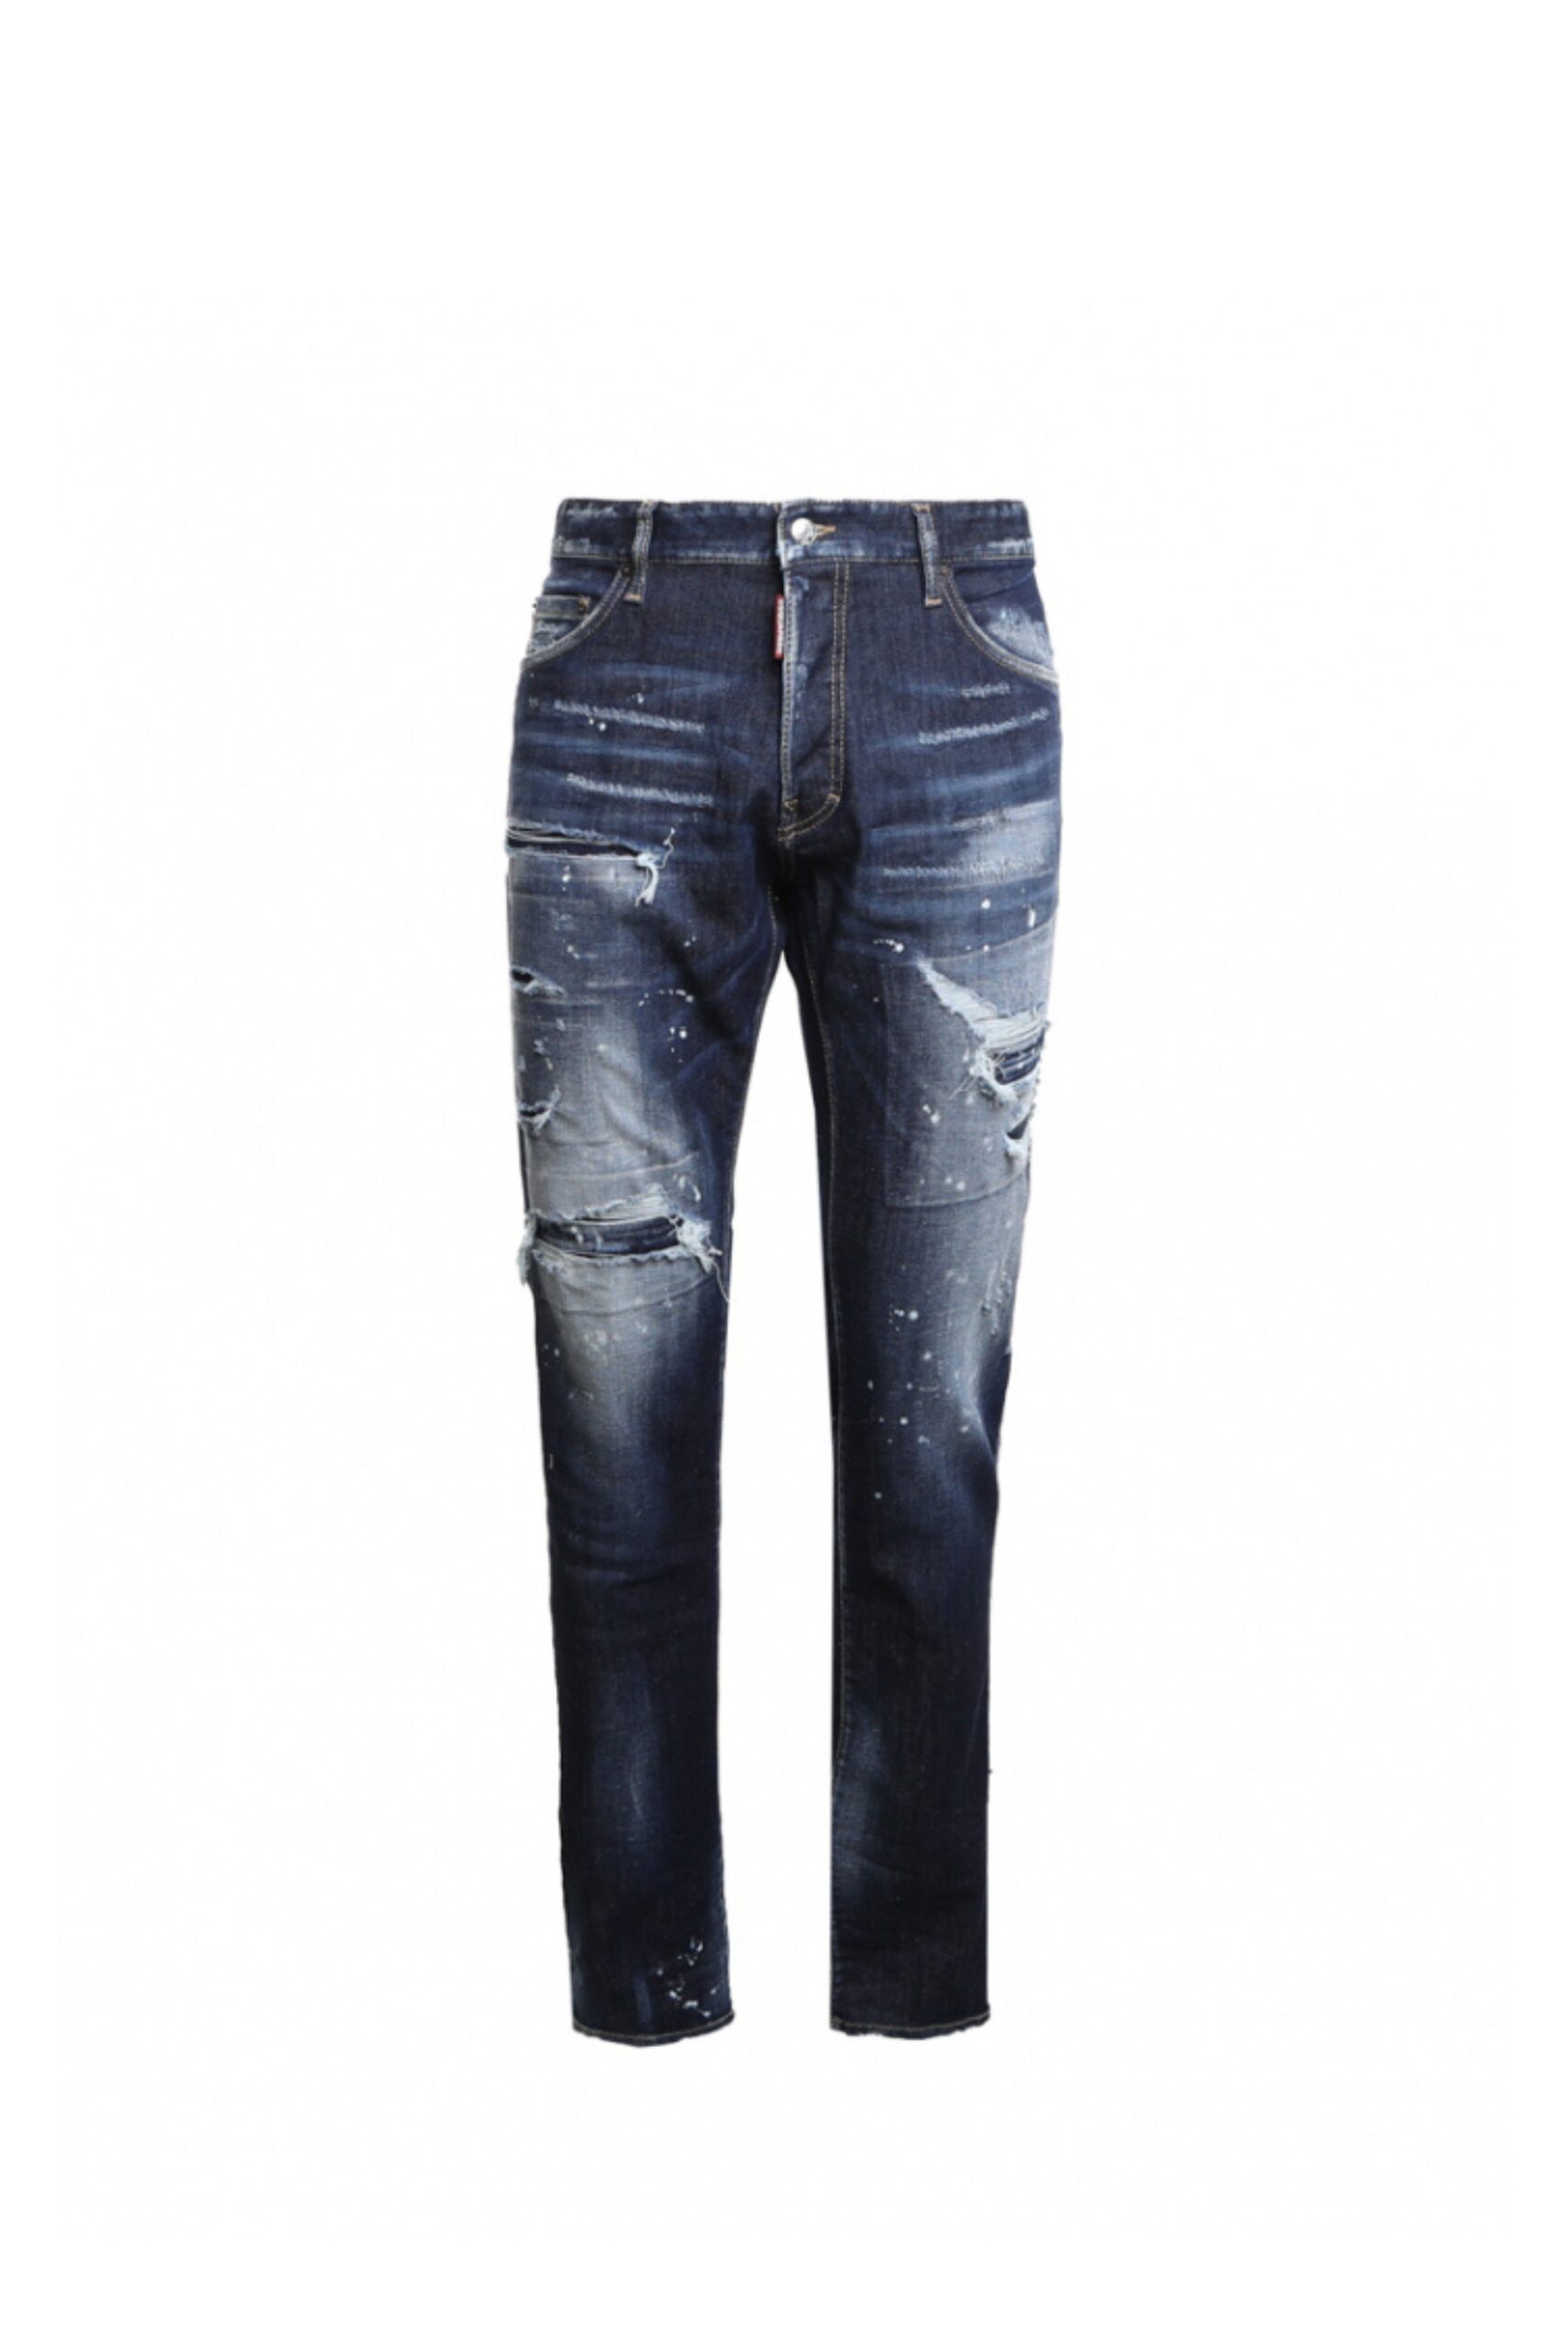 Dsquared2 “Cool Guy” Jeans Stretch